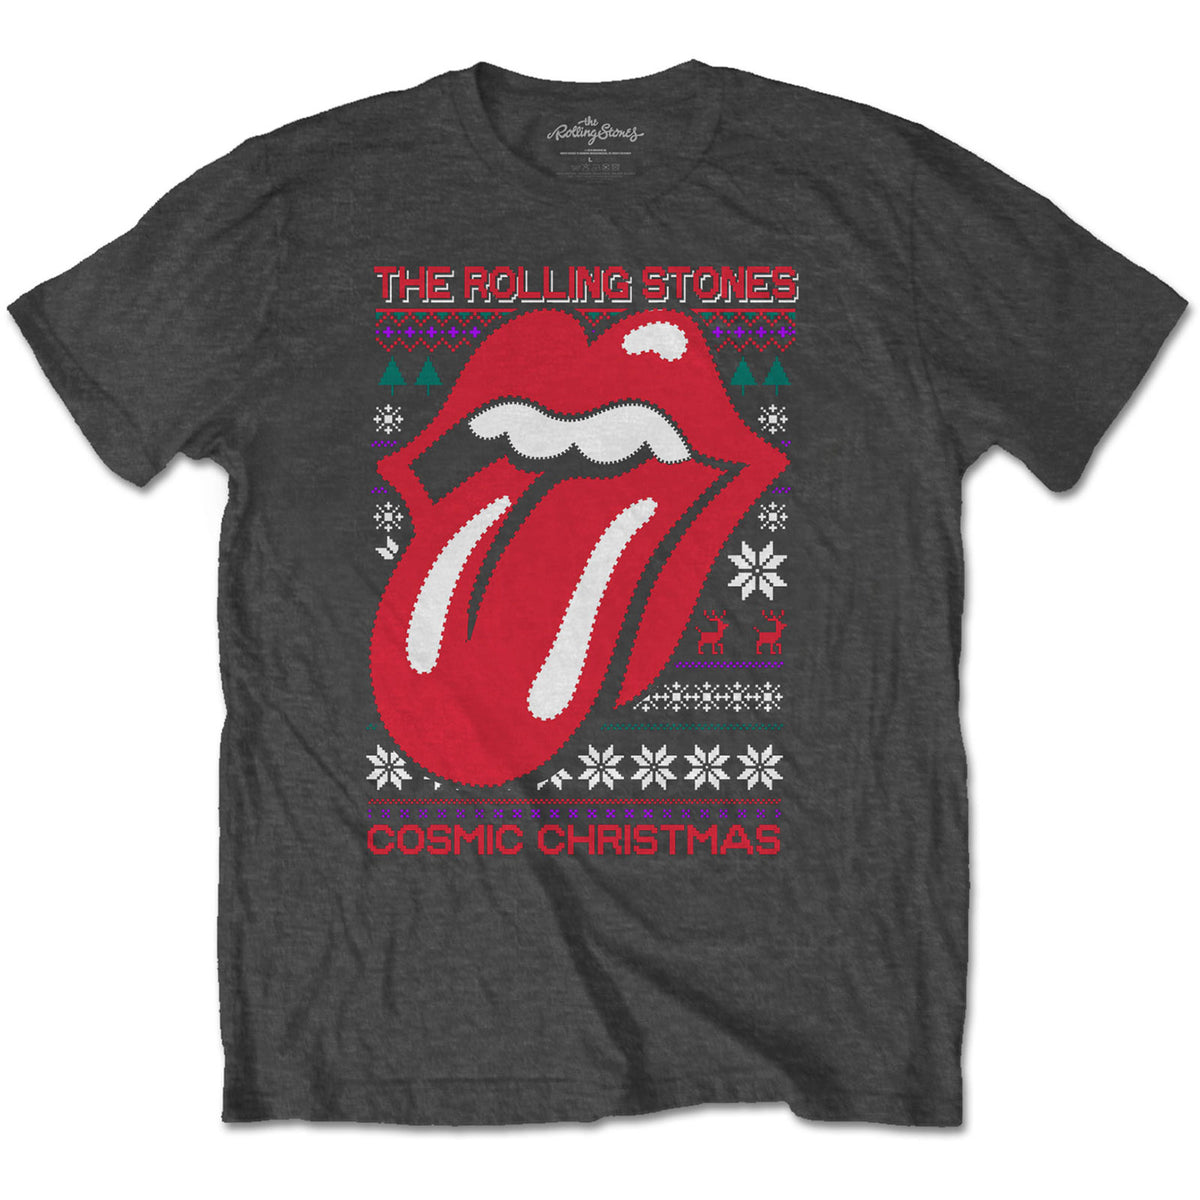 The Rolling Stones Christmas T-Shirt - Cosmic Christmas - Unisex Official Licensed Design